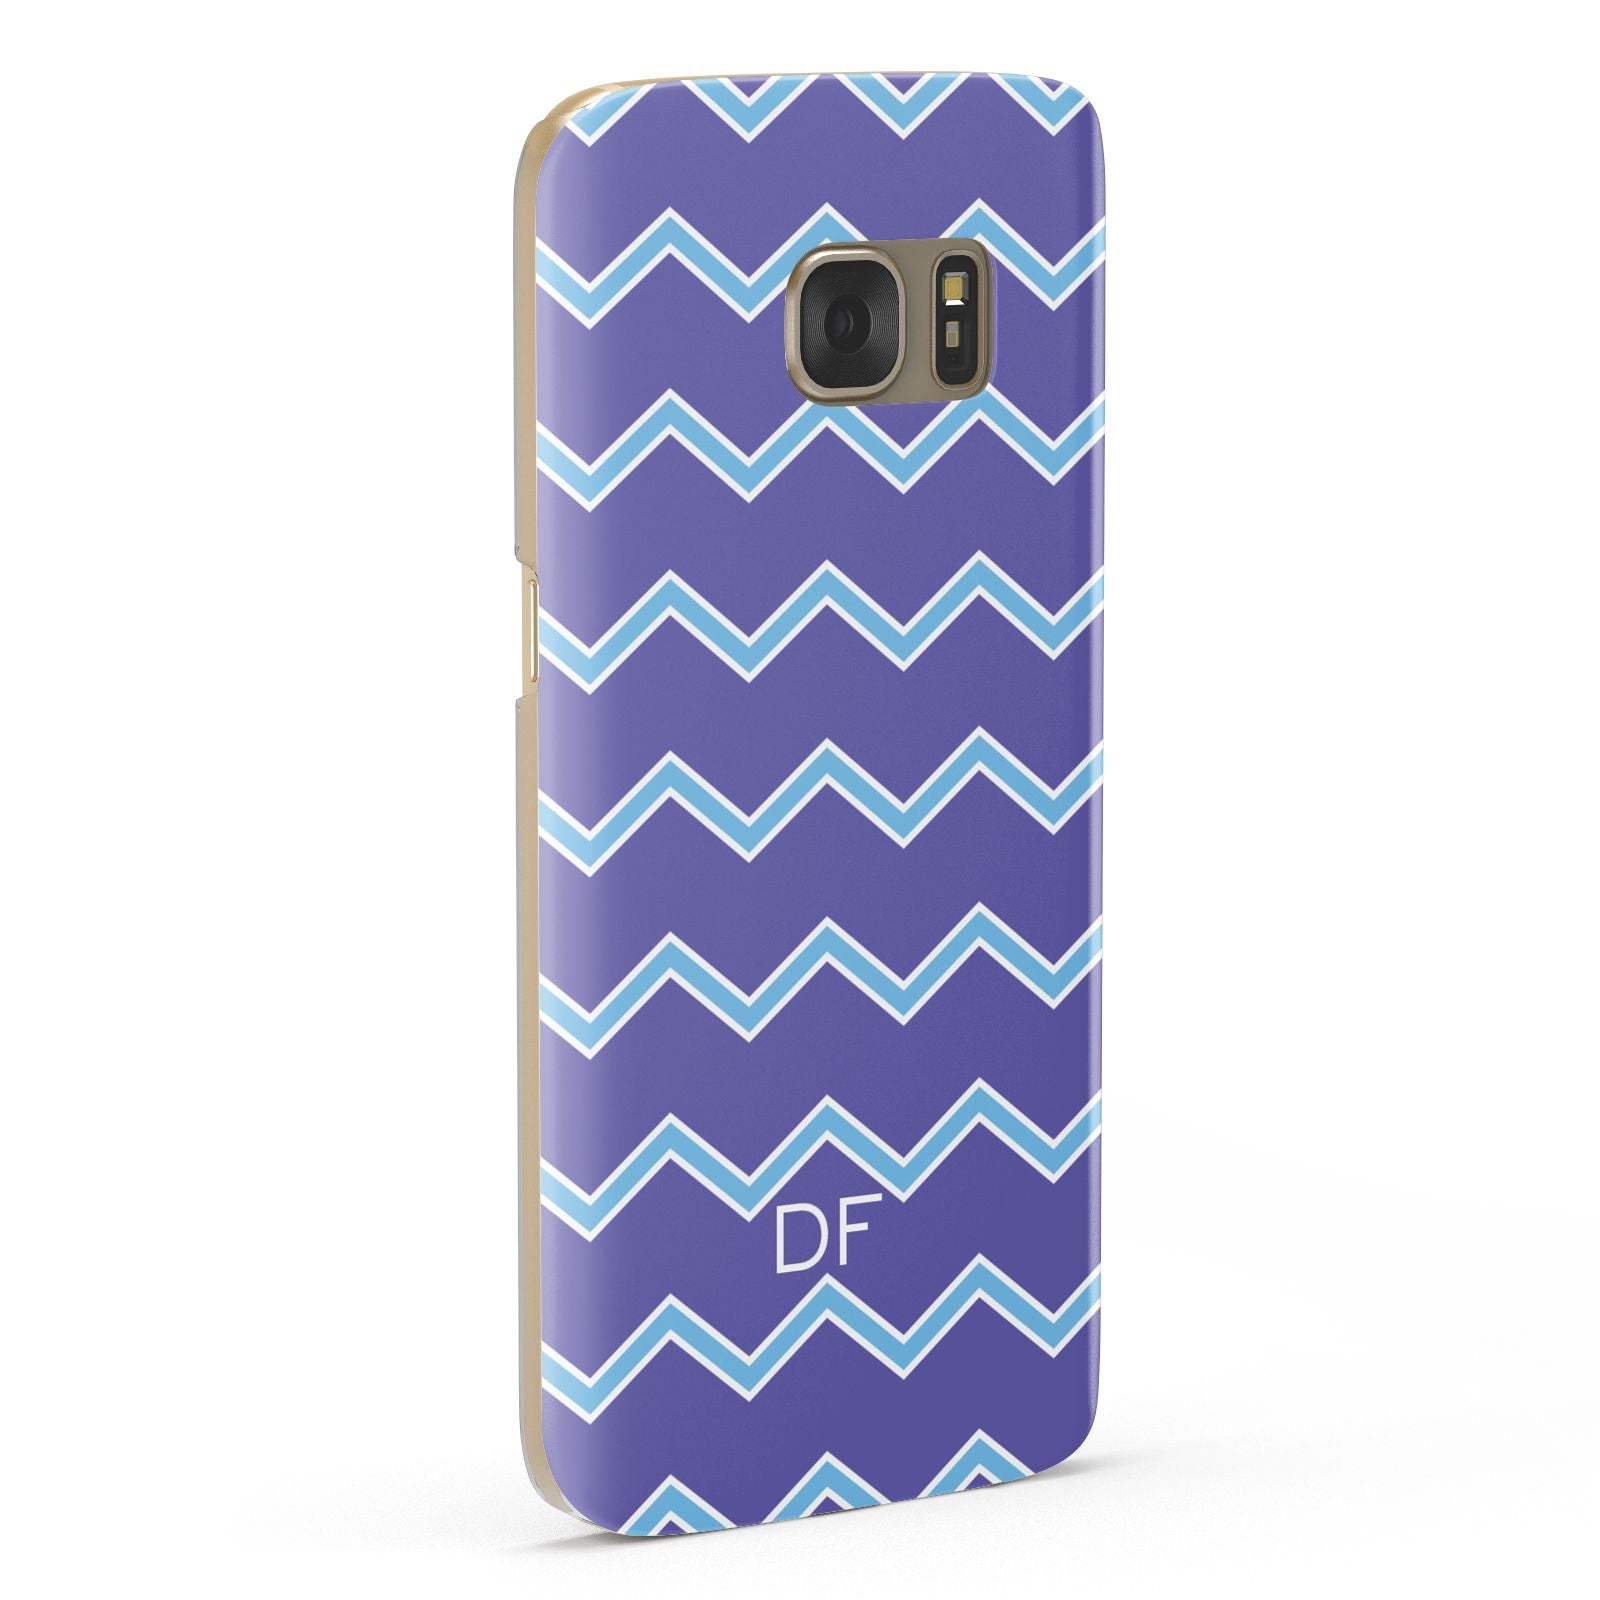 Personalised Chevron 2 Tone Samsung Galaxy Case Fourty Five Degrees